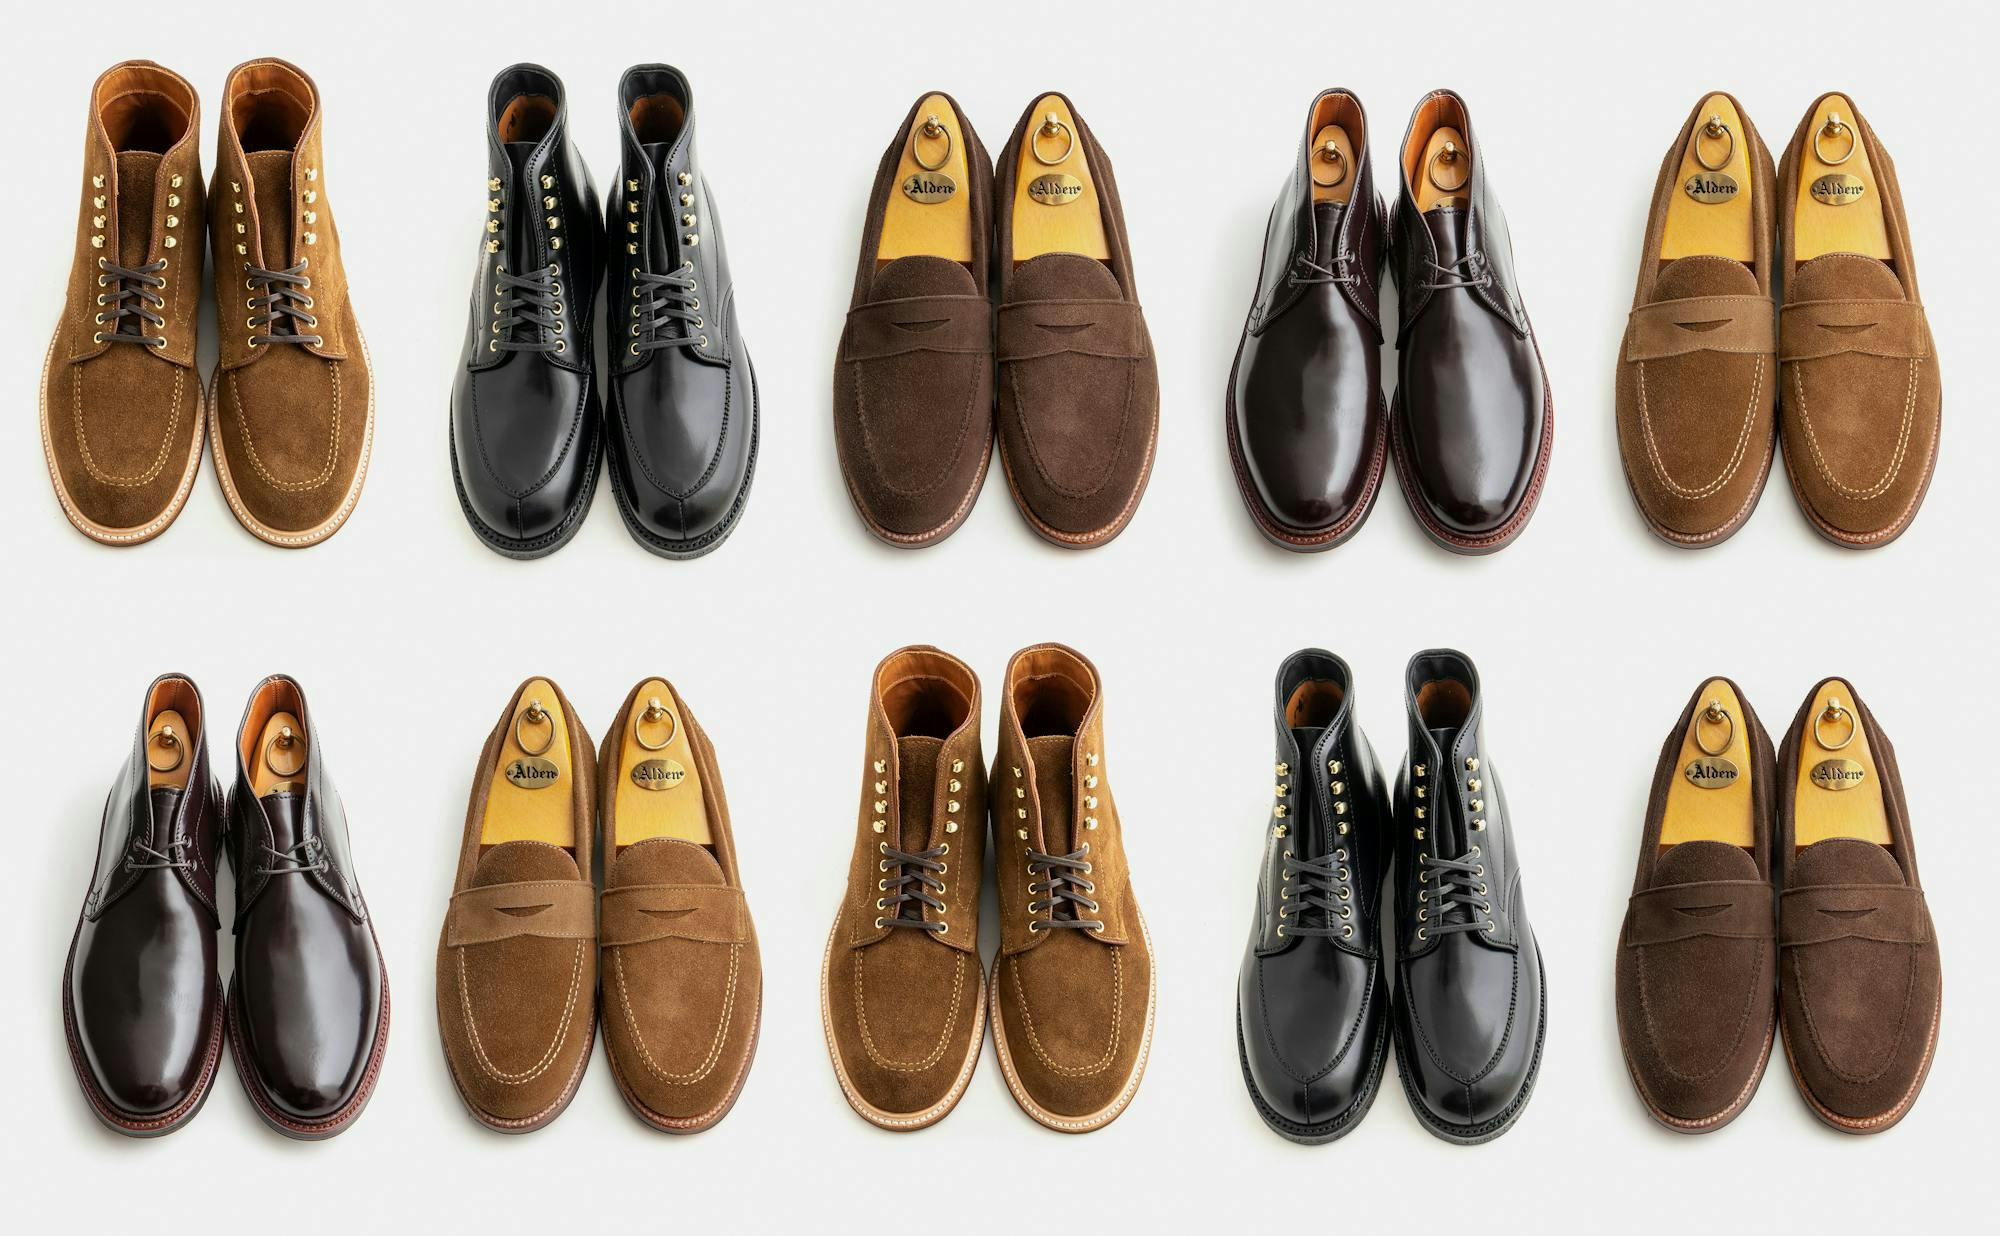 Ten pairs of Alden shoes on a light grey background.